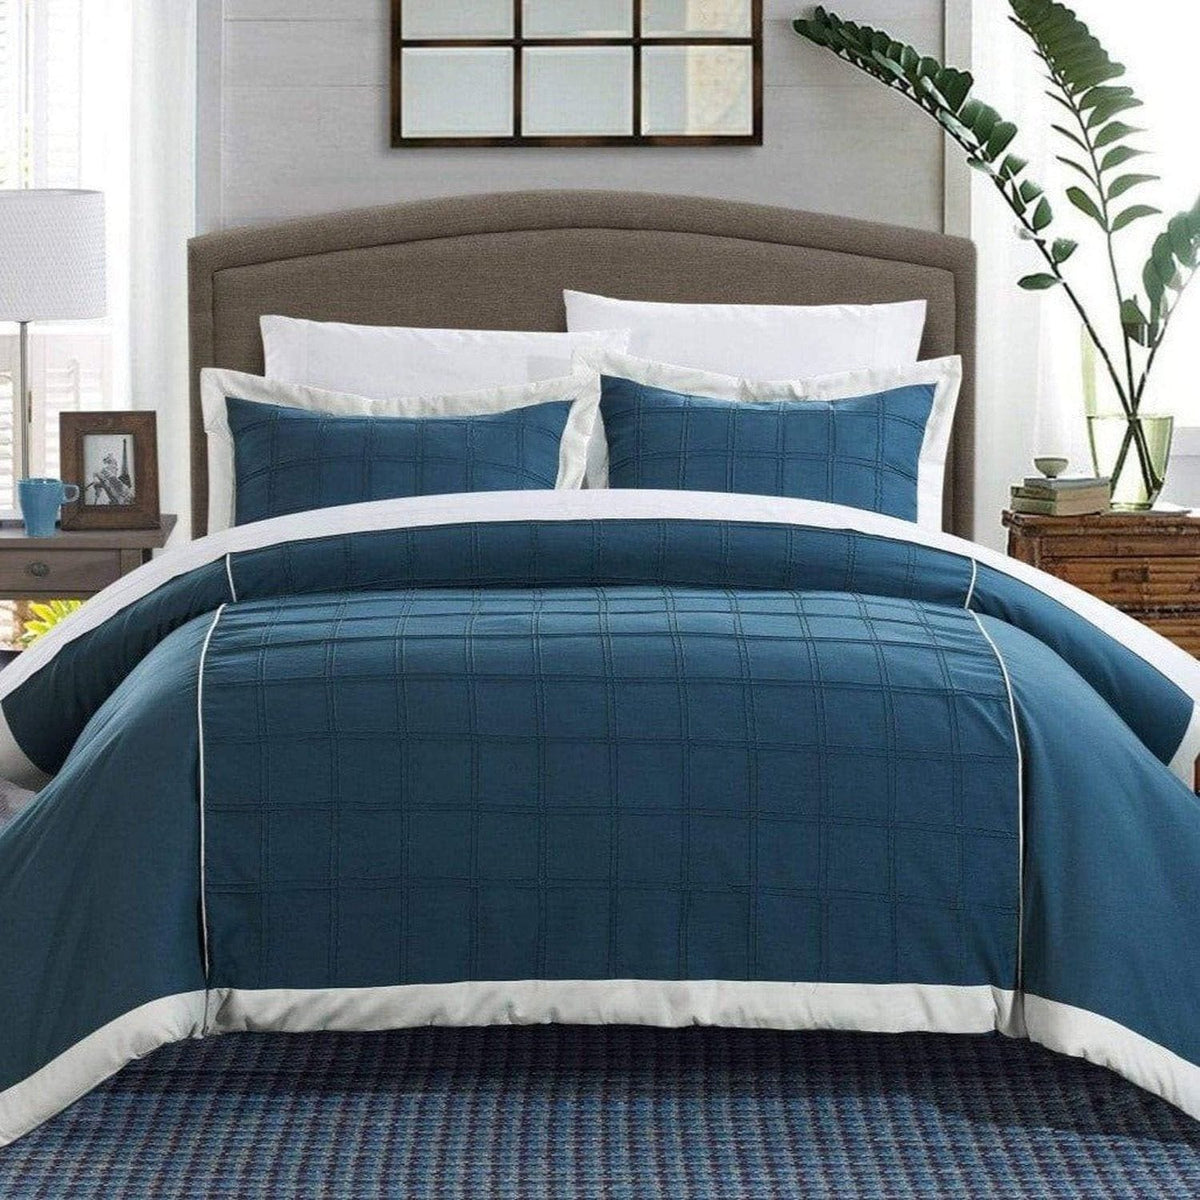 Chic Home Angelina 3 Piece Patchwork Duvet Cover Set Teal